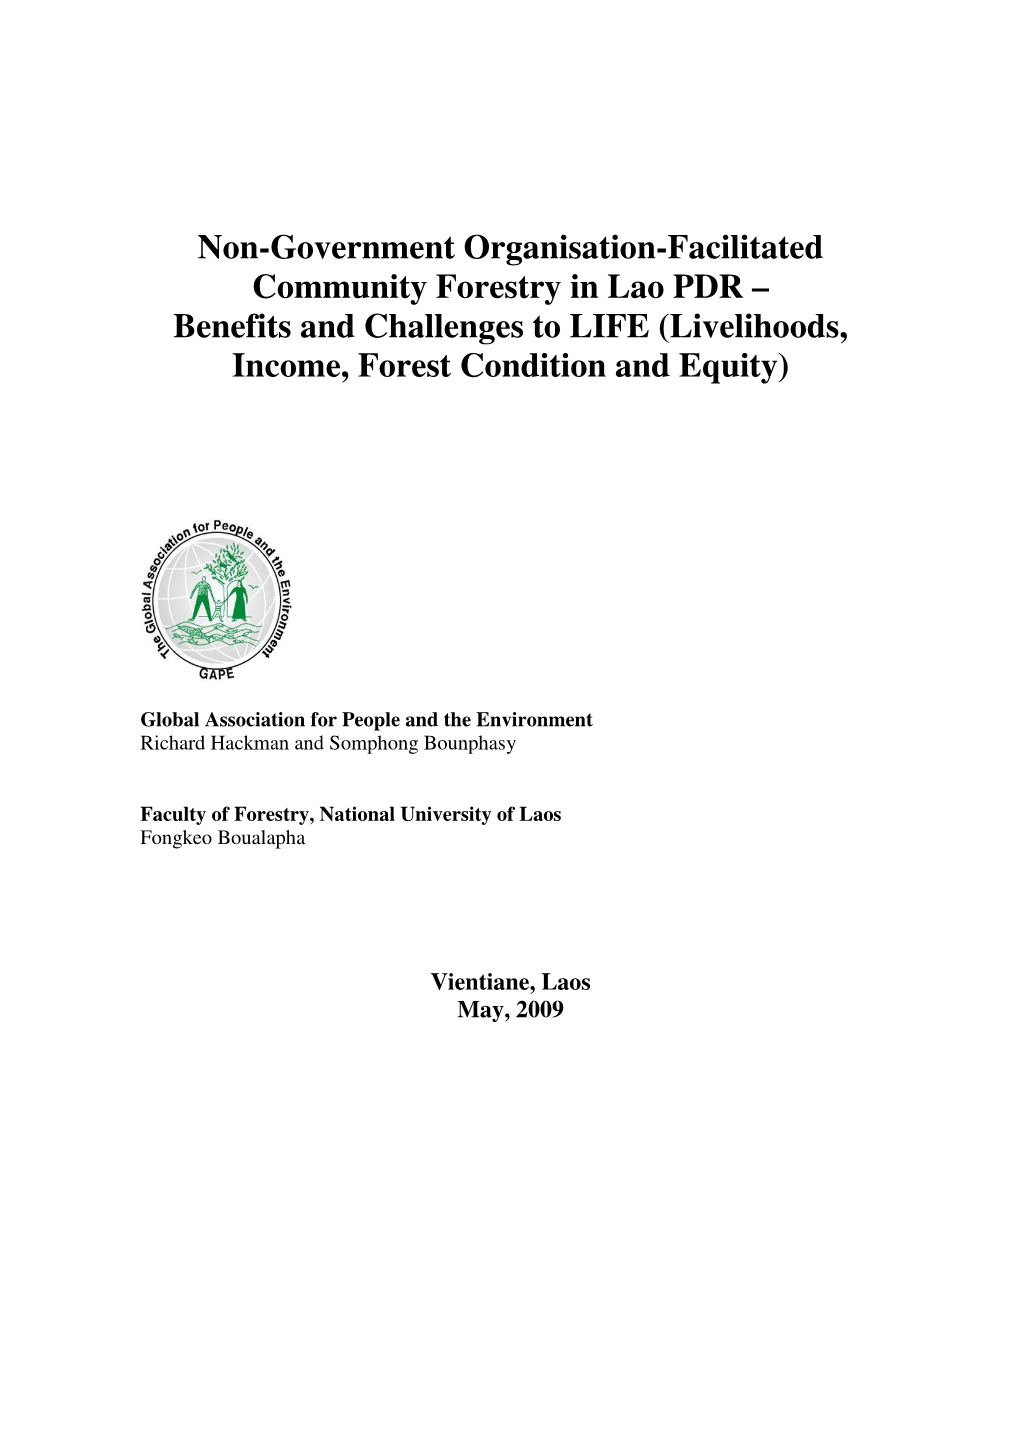 Non-Government Organisation-Facilitated Community Forestry in Lao PDR – Benefits and Challenges to LIFE (Livelihoods, Income, Forest Condition and Equity)